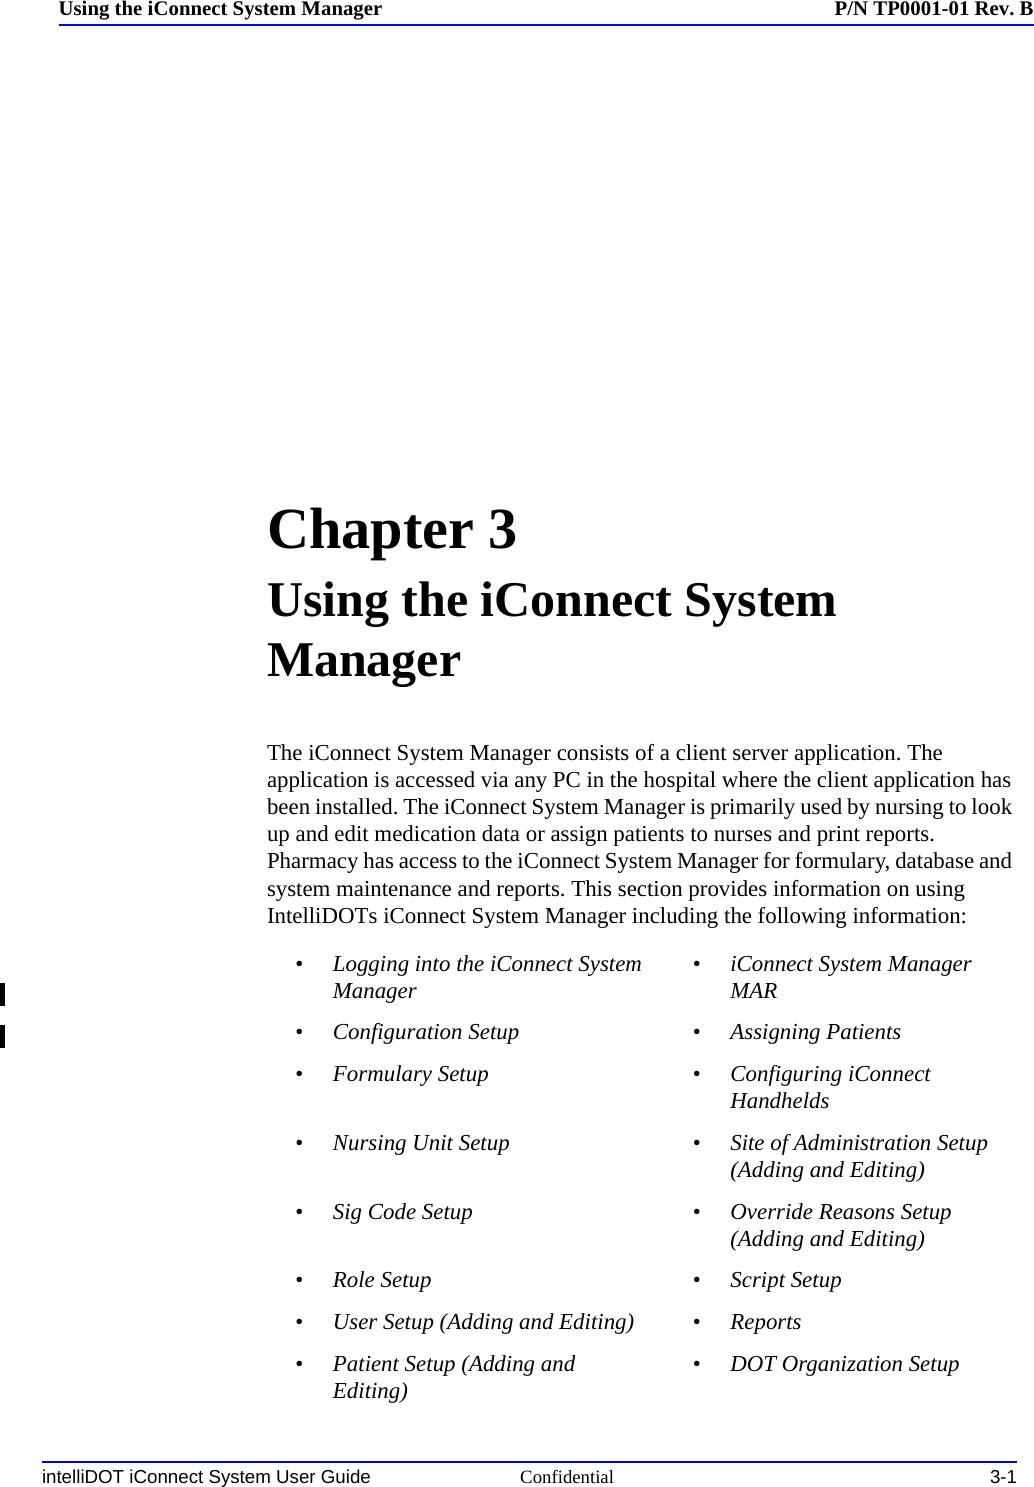 intelliDOT iConnect System User Guide Confidential 3-1Using the iConnect System Manager P/N TP0001-01 Rev. BChapter 3Using the iConnect System ManagerThe iConnect System Manager consists of a client server application. The application is accessed via any PC in the hospital where the client application has been installed. The iConnect System Manager is primarily used by nursing to look up and edit medication data or assign patients to nurses and print reports. Pharmacy has access to the iConnect System Manager for formulary, database and system maintenance and reports. This section provides information on using IntelliDOTs iConnect System Manager including the following information: •Logging into the iConnect System Manager •iConnect System Manager MAR•Configuration Setup •Assigning Patients•Formulary Setup •Configuring iConnect Handhelds•Nursing Unit Setup •Site of Administration Setup (Adding and Editing)•Sig Code Setup •Override Reasons Setup (Adding and Editing)•Role Setup •Script Setup•User Setup (Adding and Editing) •Reports•Patient Setup (Adding and Editing) •DOT Organization Setup